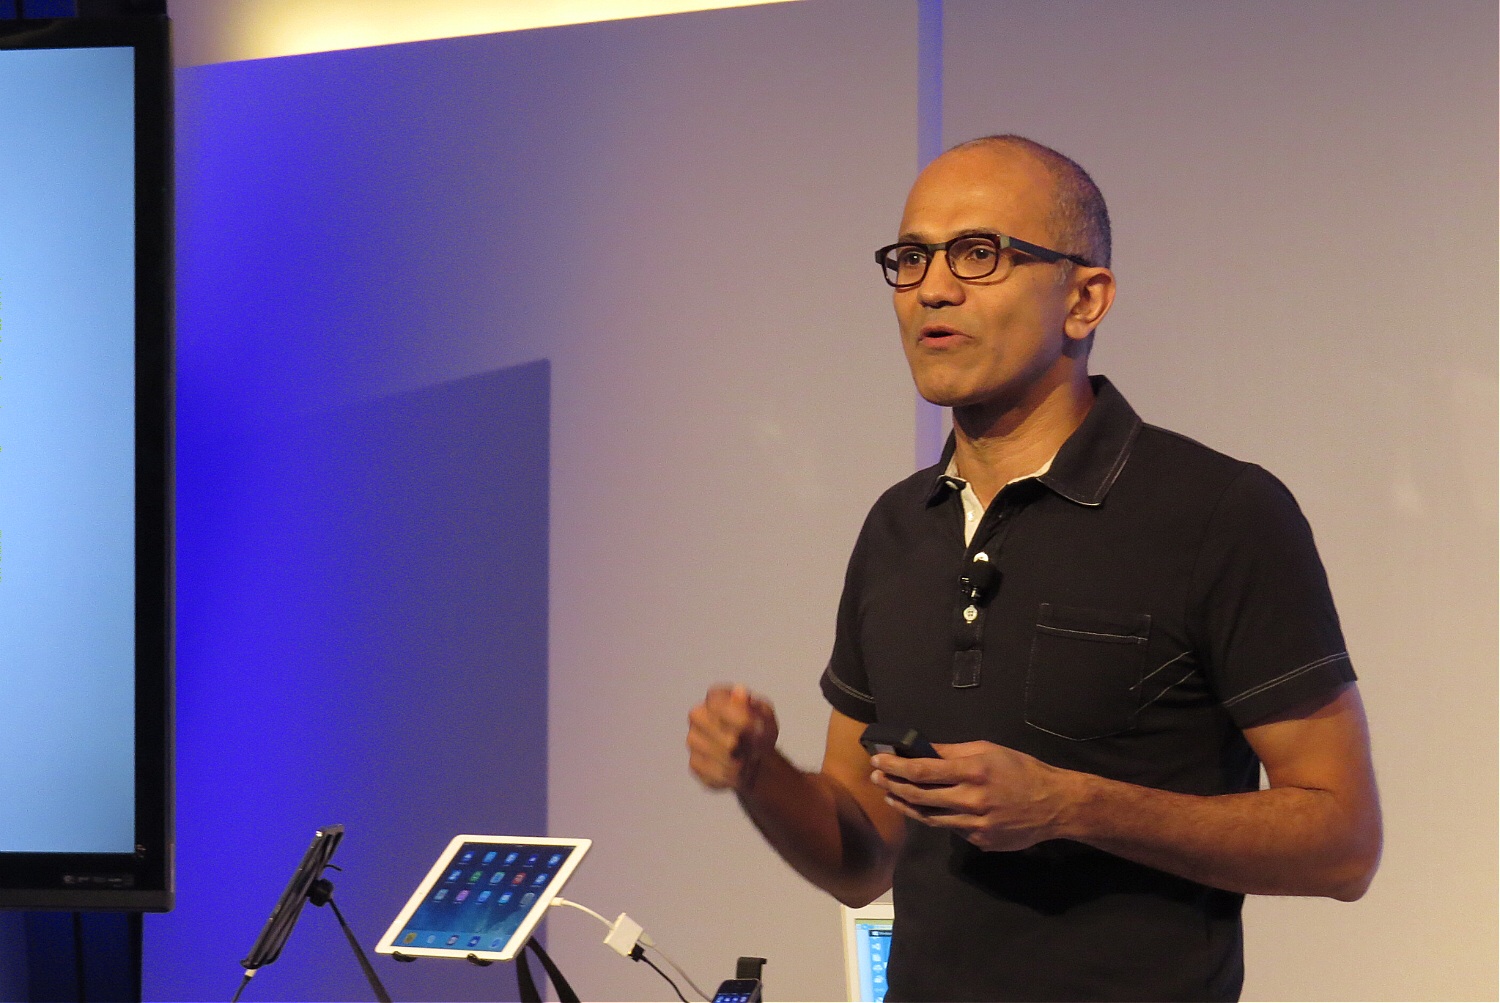 Microsoft CEO Satya Nadella at the company's press event in San Francisco on March 27, 2014 (Harry McCracken / TIME)